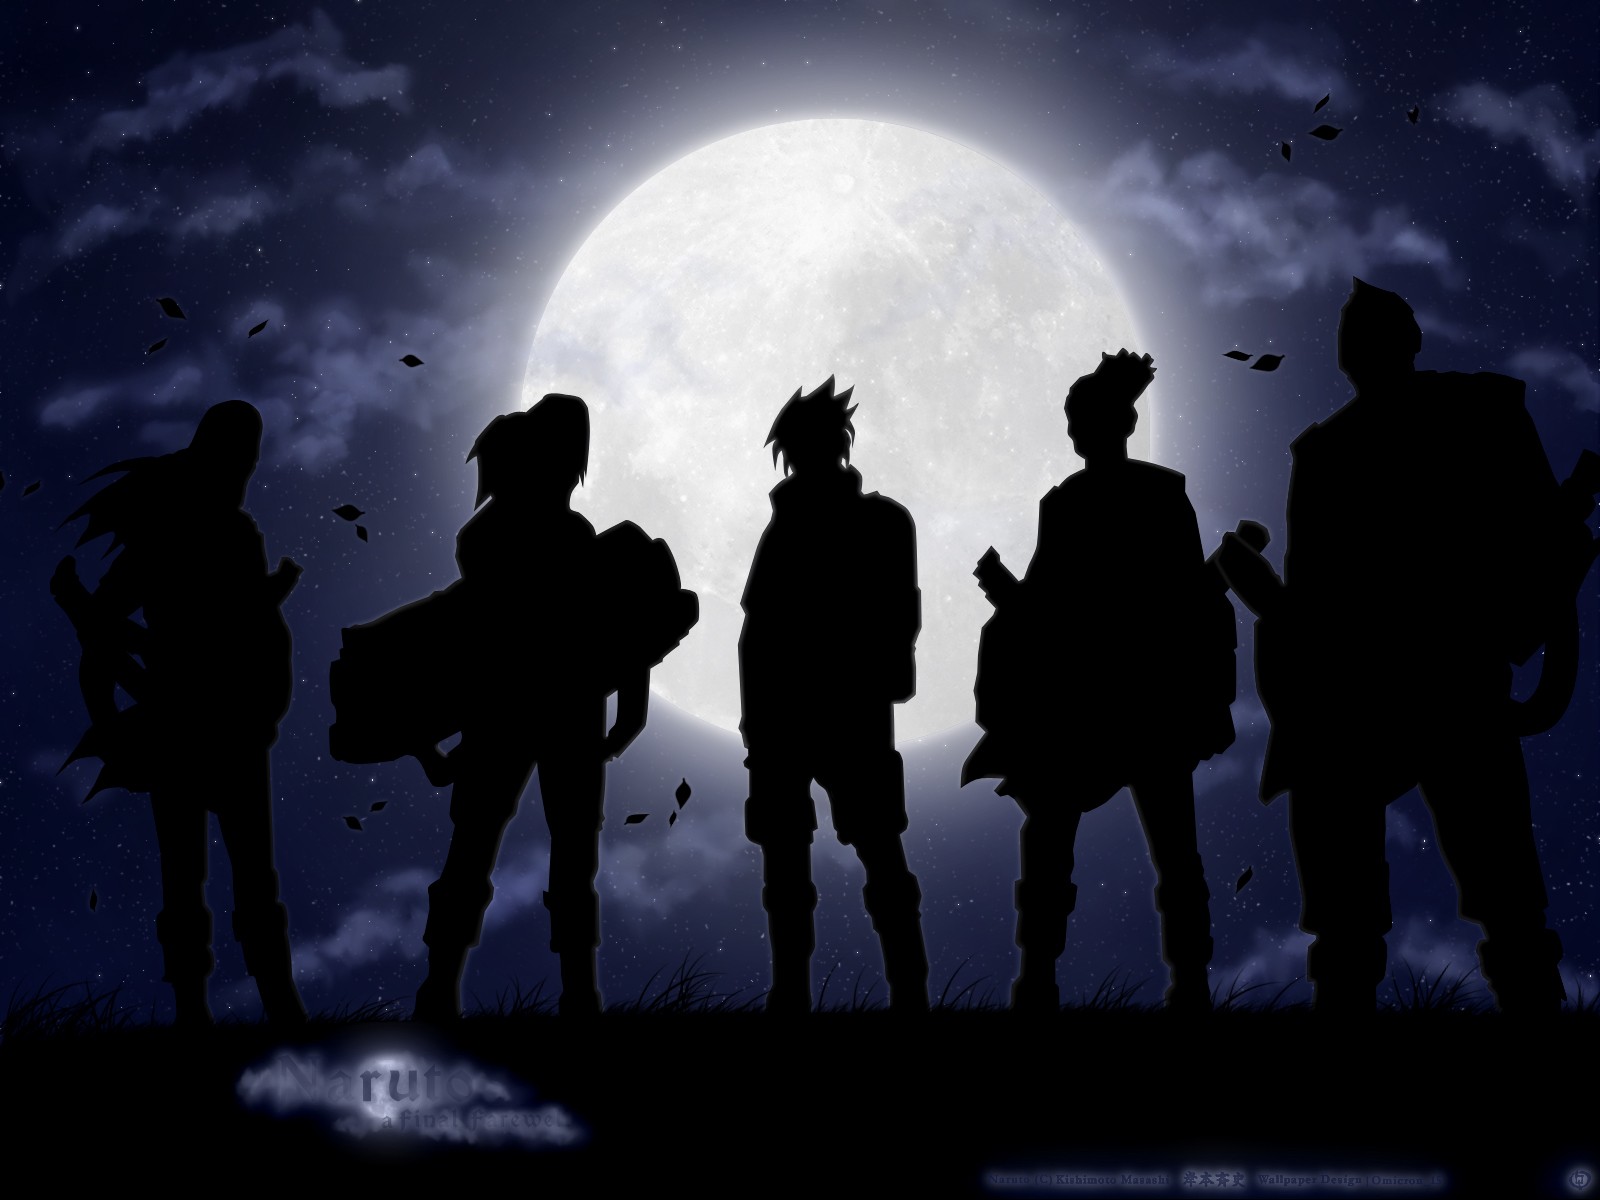 Wallpaper Collections: Naruto Shippuden Wallpapers